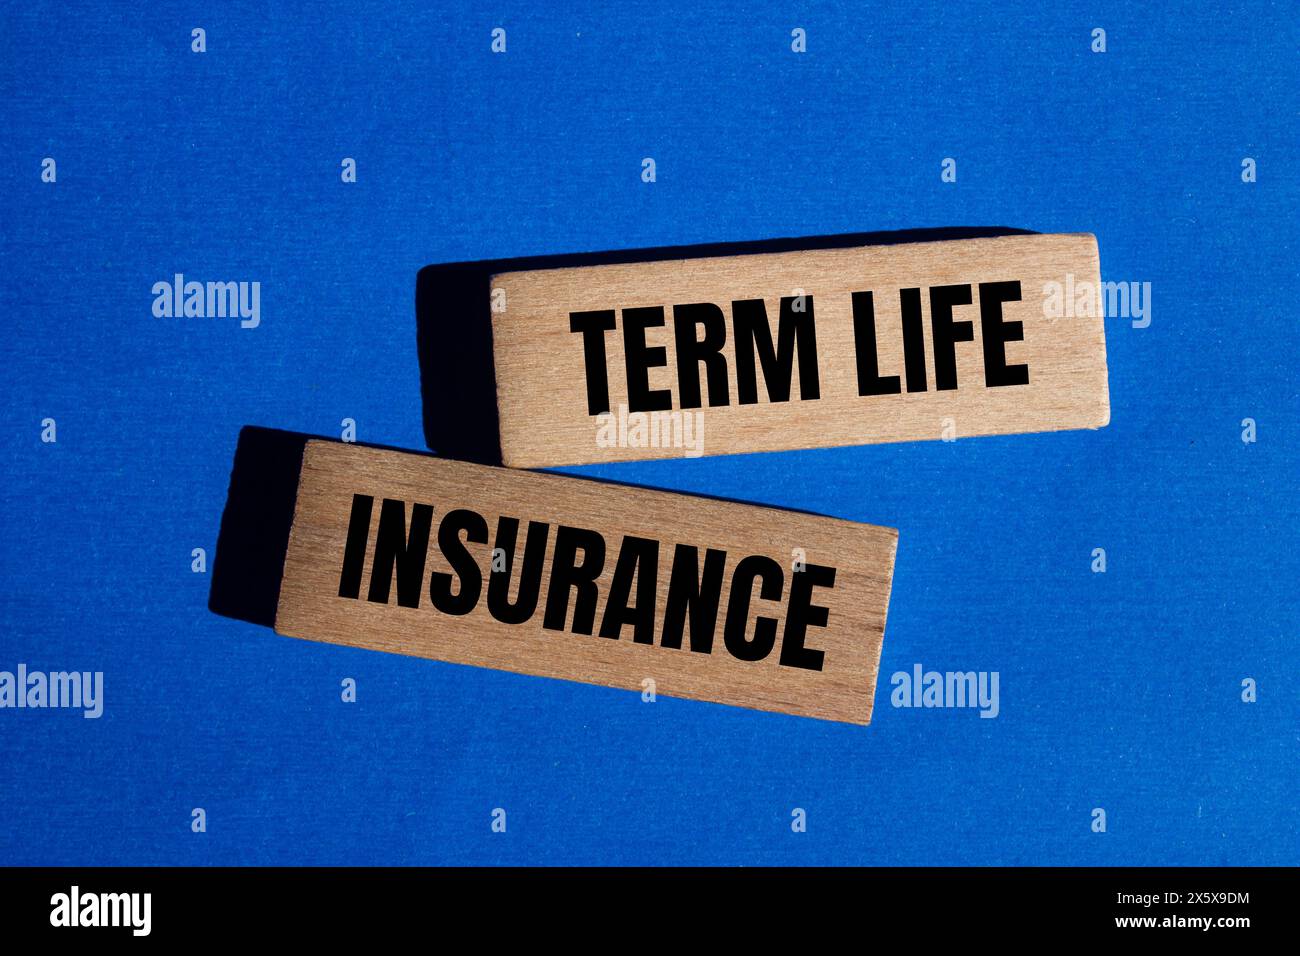 Term life insurance words written on wooden blocks with blue background. Conceptual term life insurance symbol. Copy space. Stock Photo